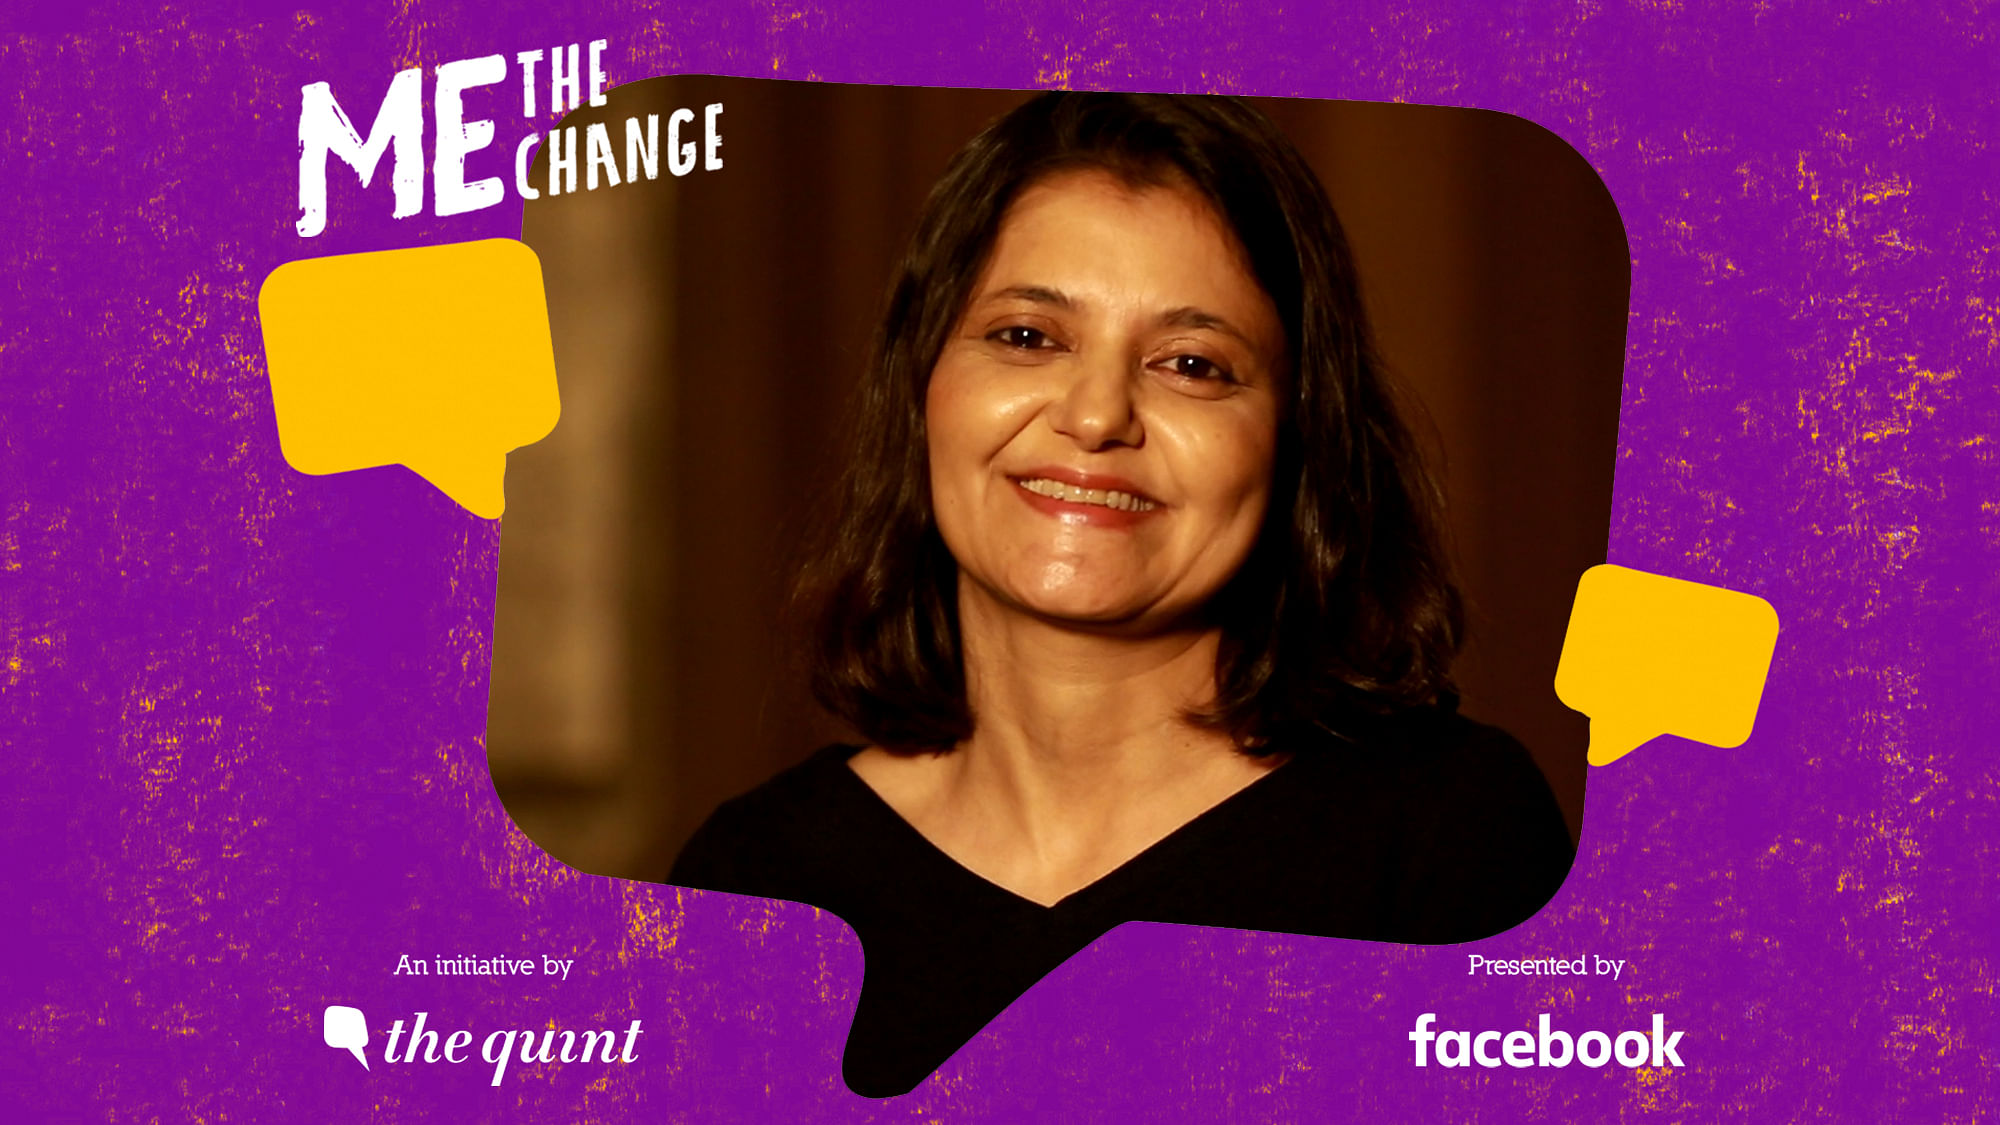 SHEROES founder Sairee Chahal speaks on <b>The Quint’s</b> ‘Me, the Change’ campaign.